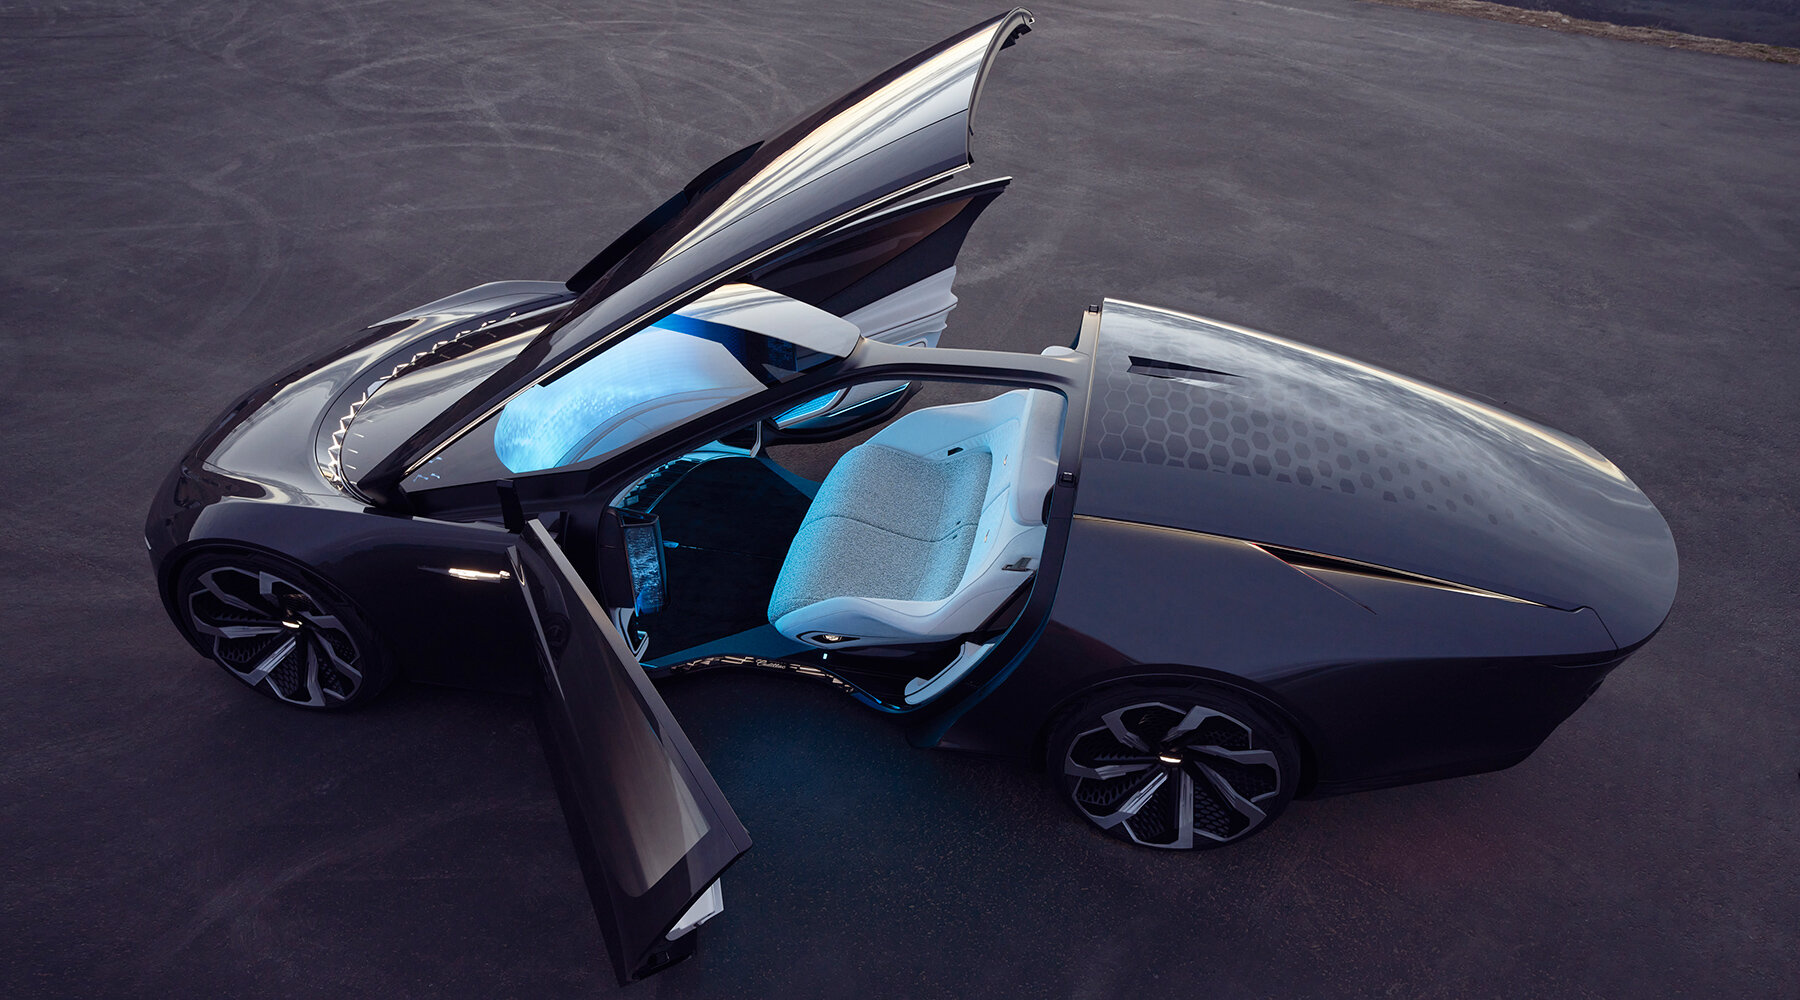 cadillac innerspace unveils selfdriving electric car concept at CES 2022